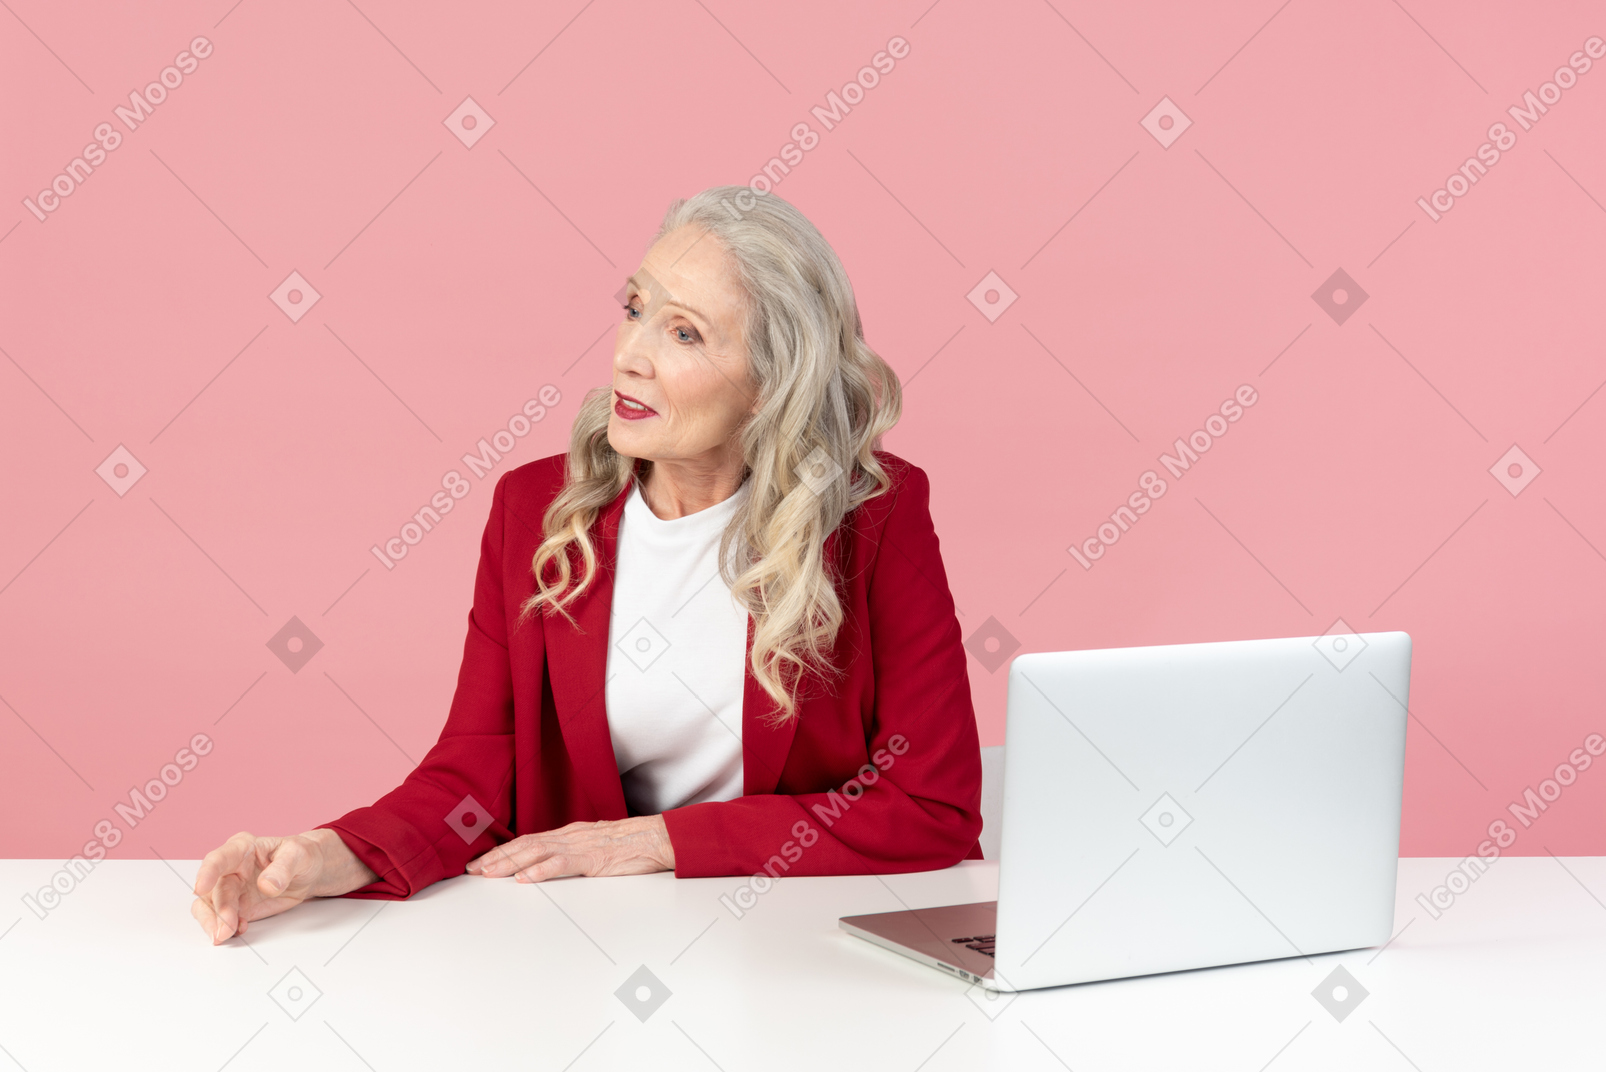 Aged stylish woman sitting at the computer desk and looking aside